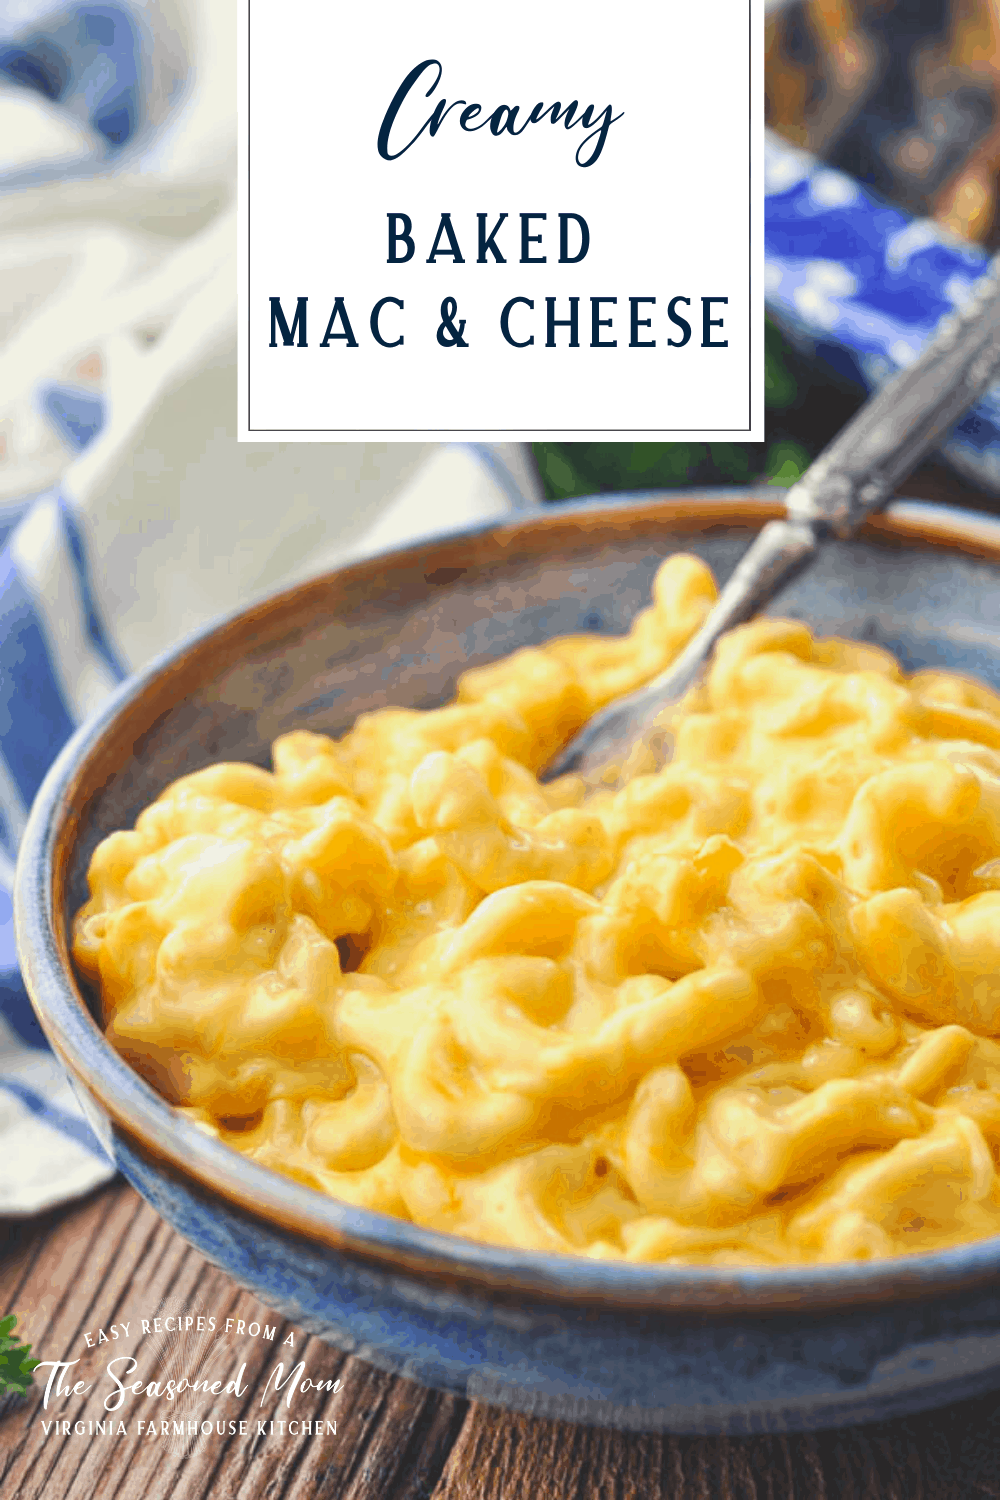 Creamy baked mac and cheese recipe served in a blue bowl with text title box at top